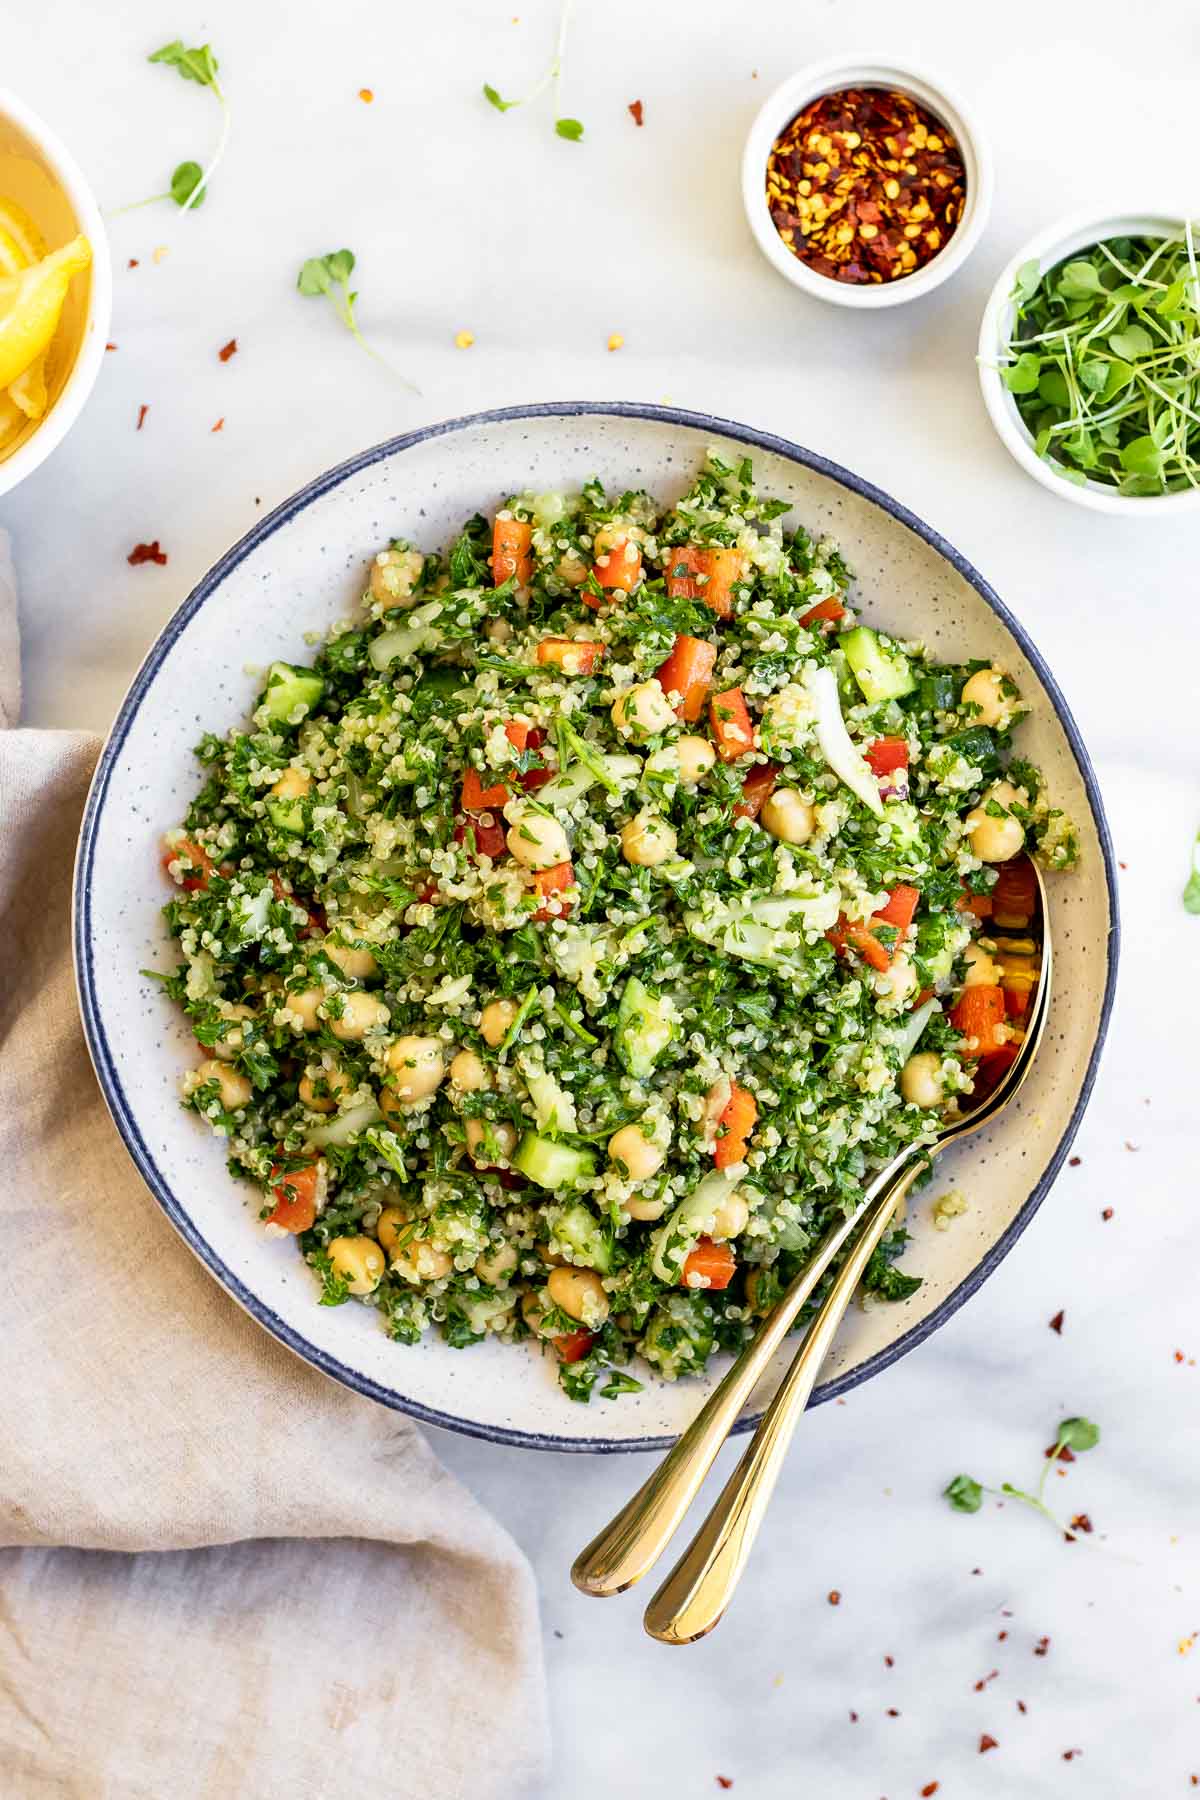 Gluten free quinoa tabbouleh salad in a large blue bowl.